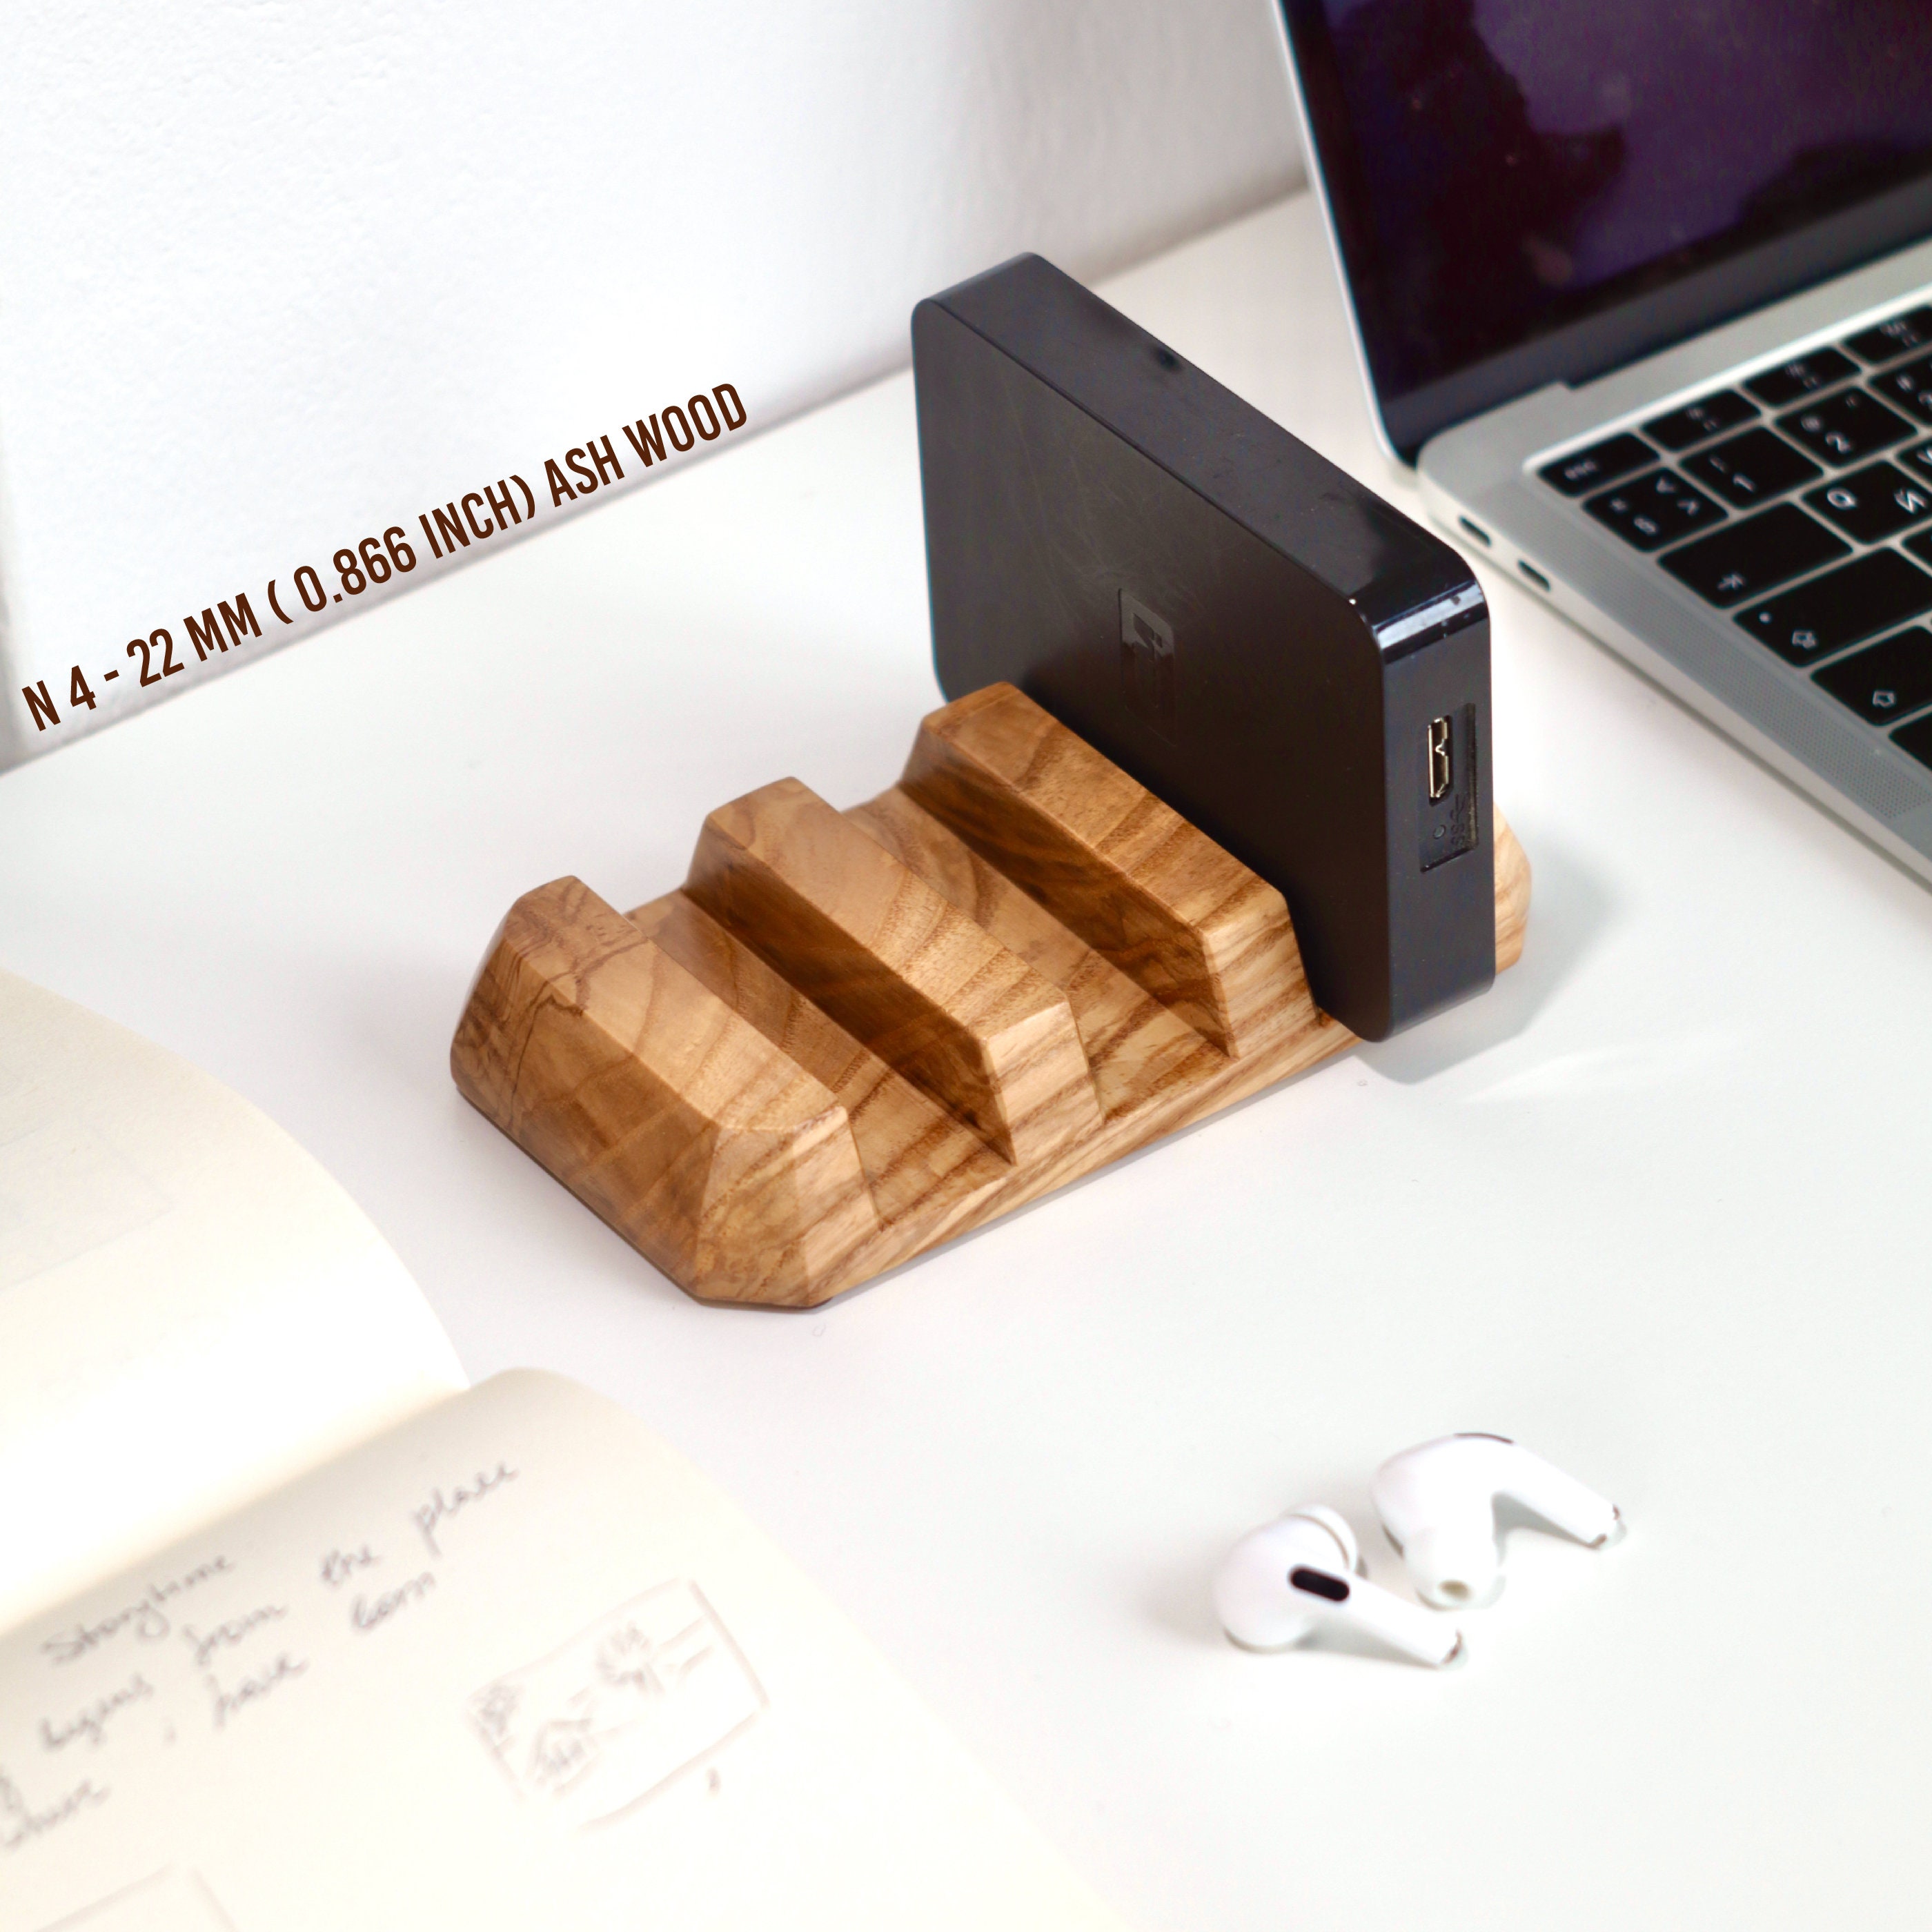 Wood Stand, Holder for 3 Hard Drive External Portable, Accessories